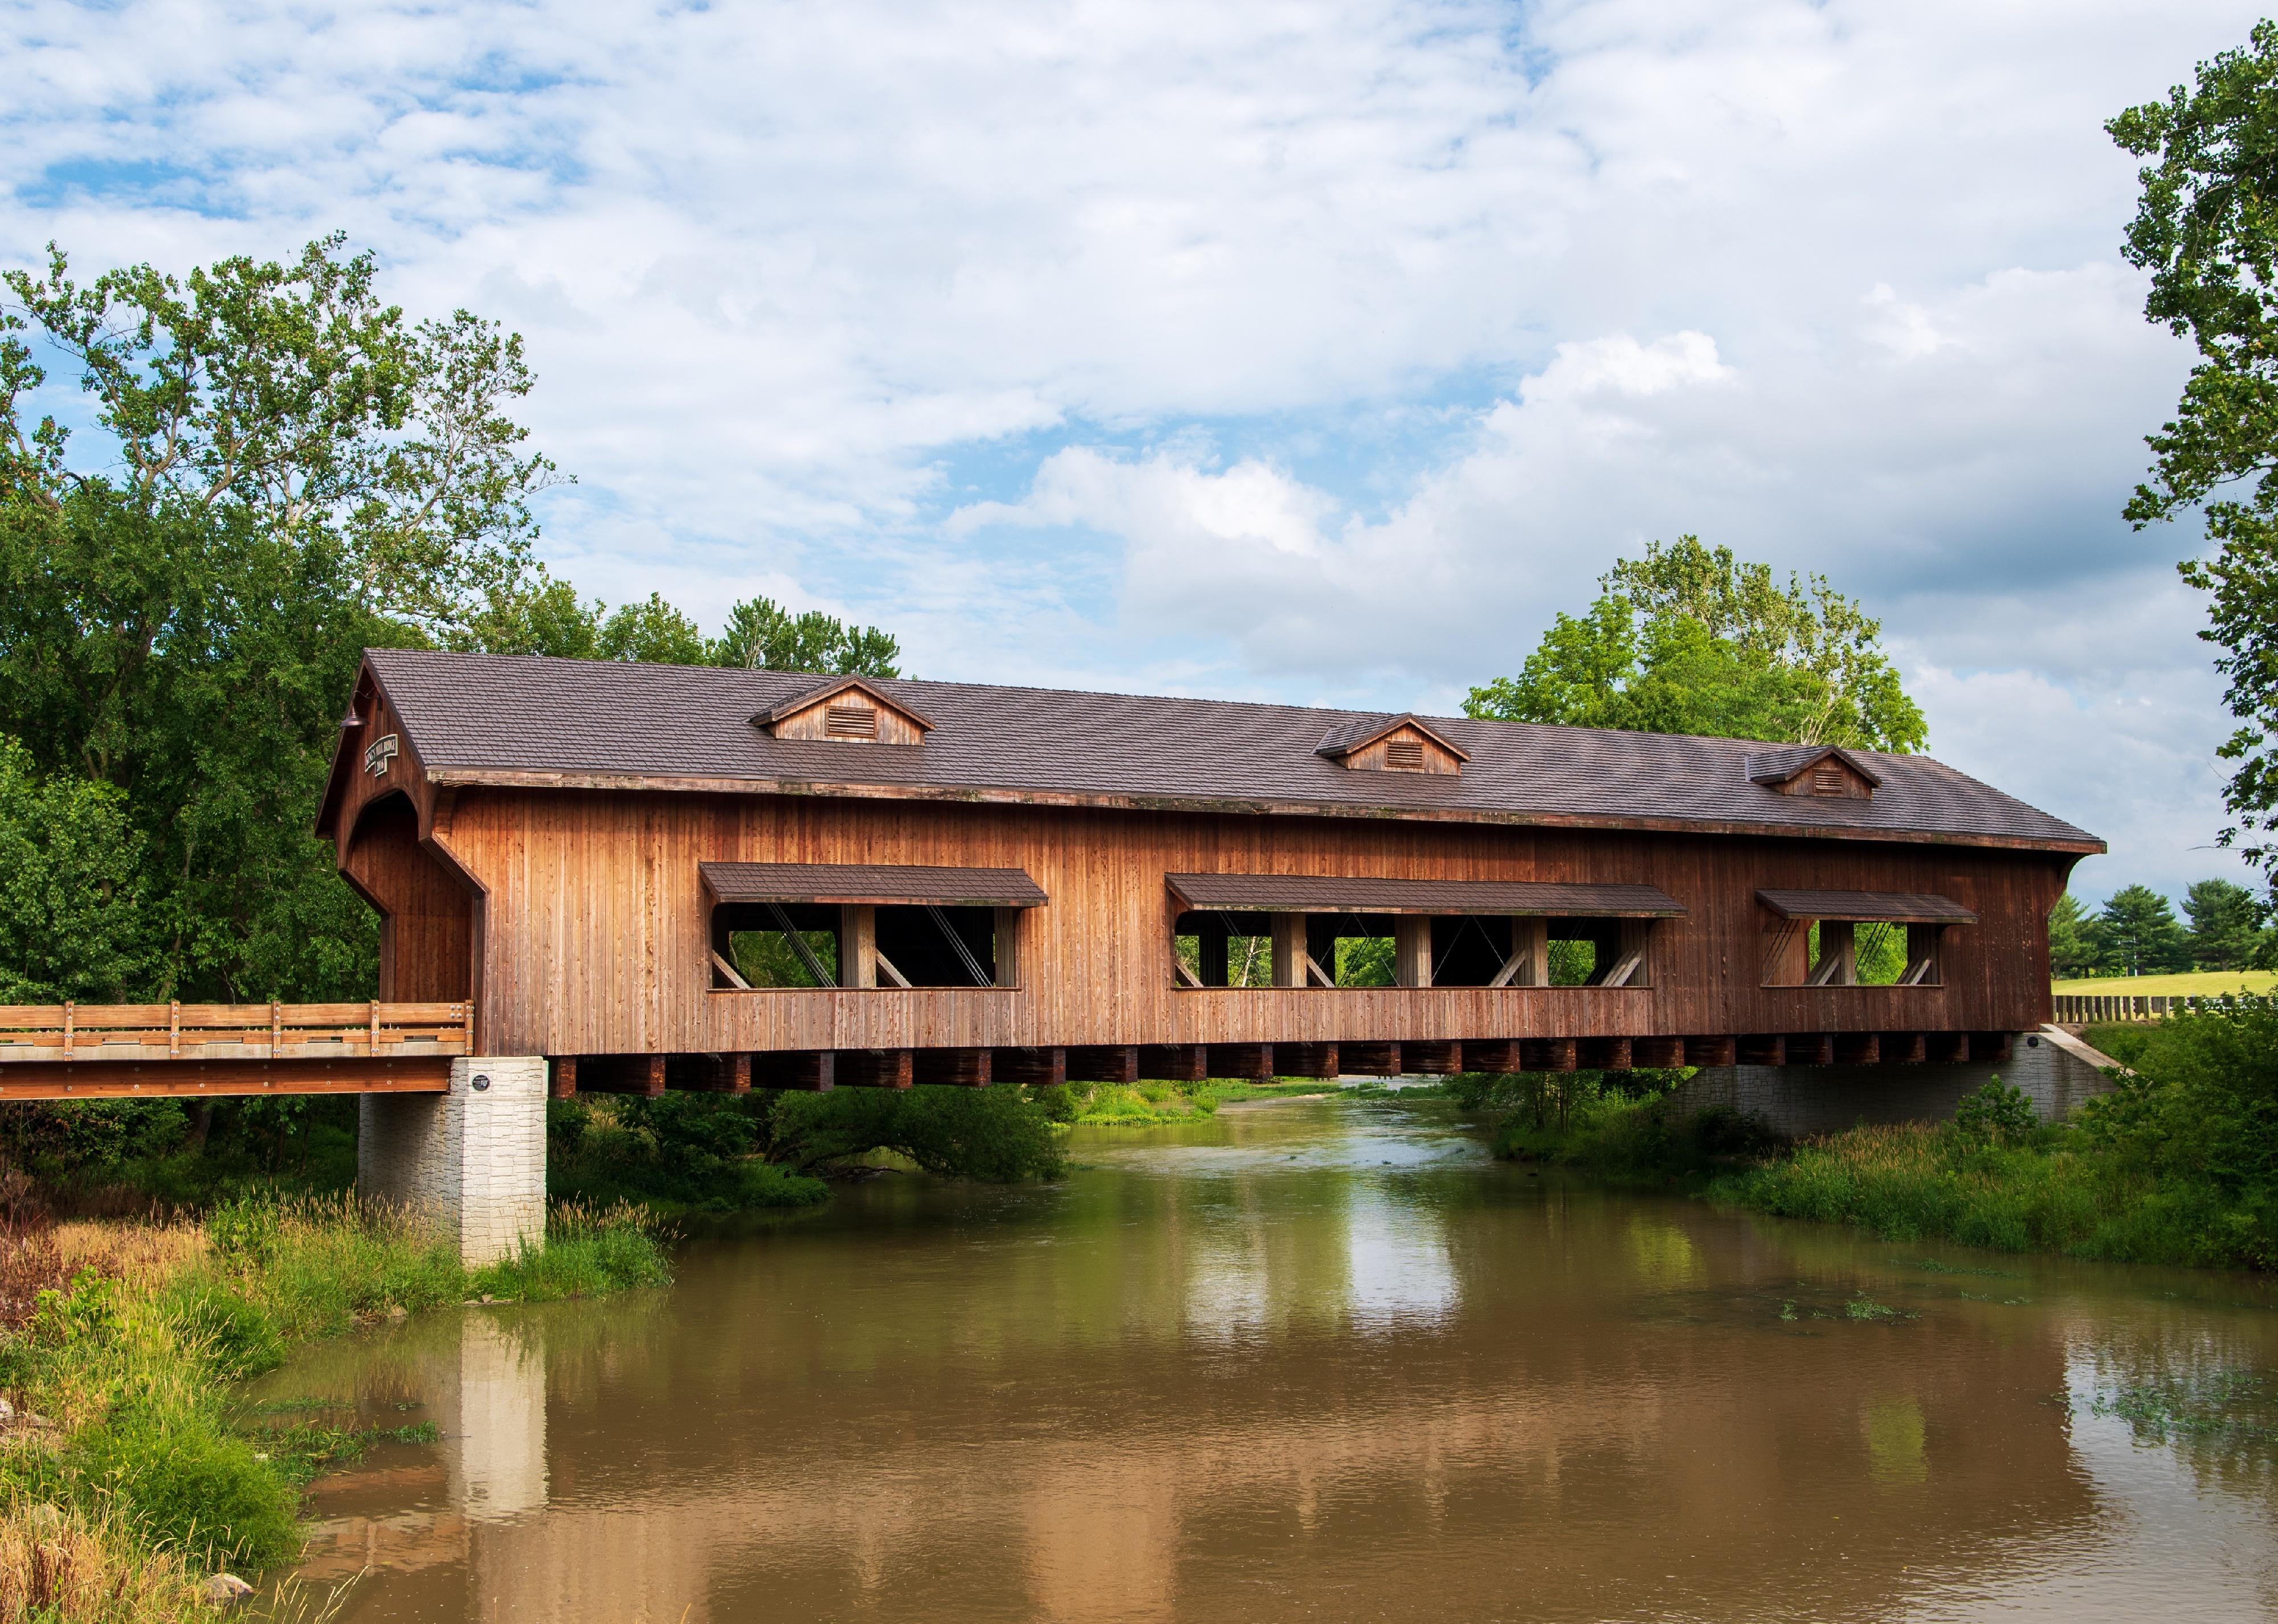 Kings Mill Covered Bridge over the Olentangy River in Marion, Ohio.